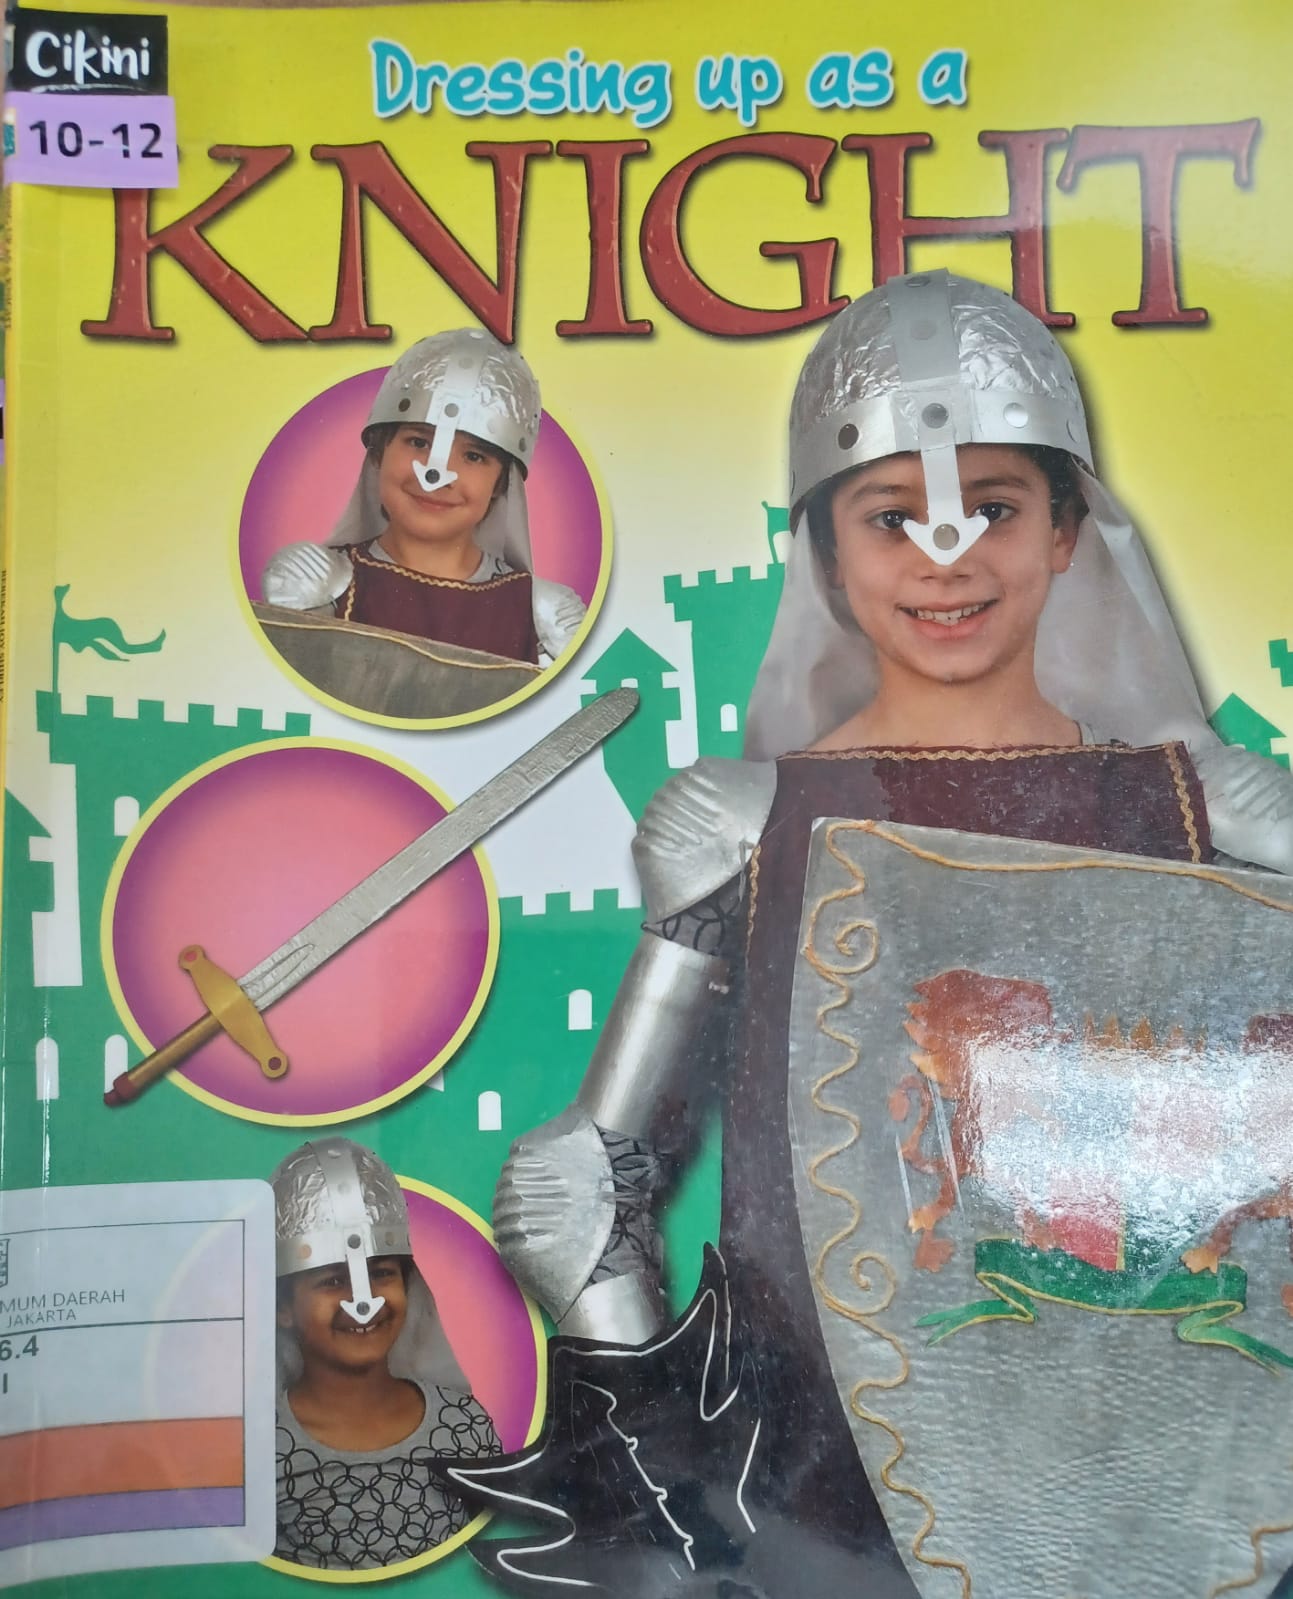 Dressing up as a knight